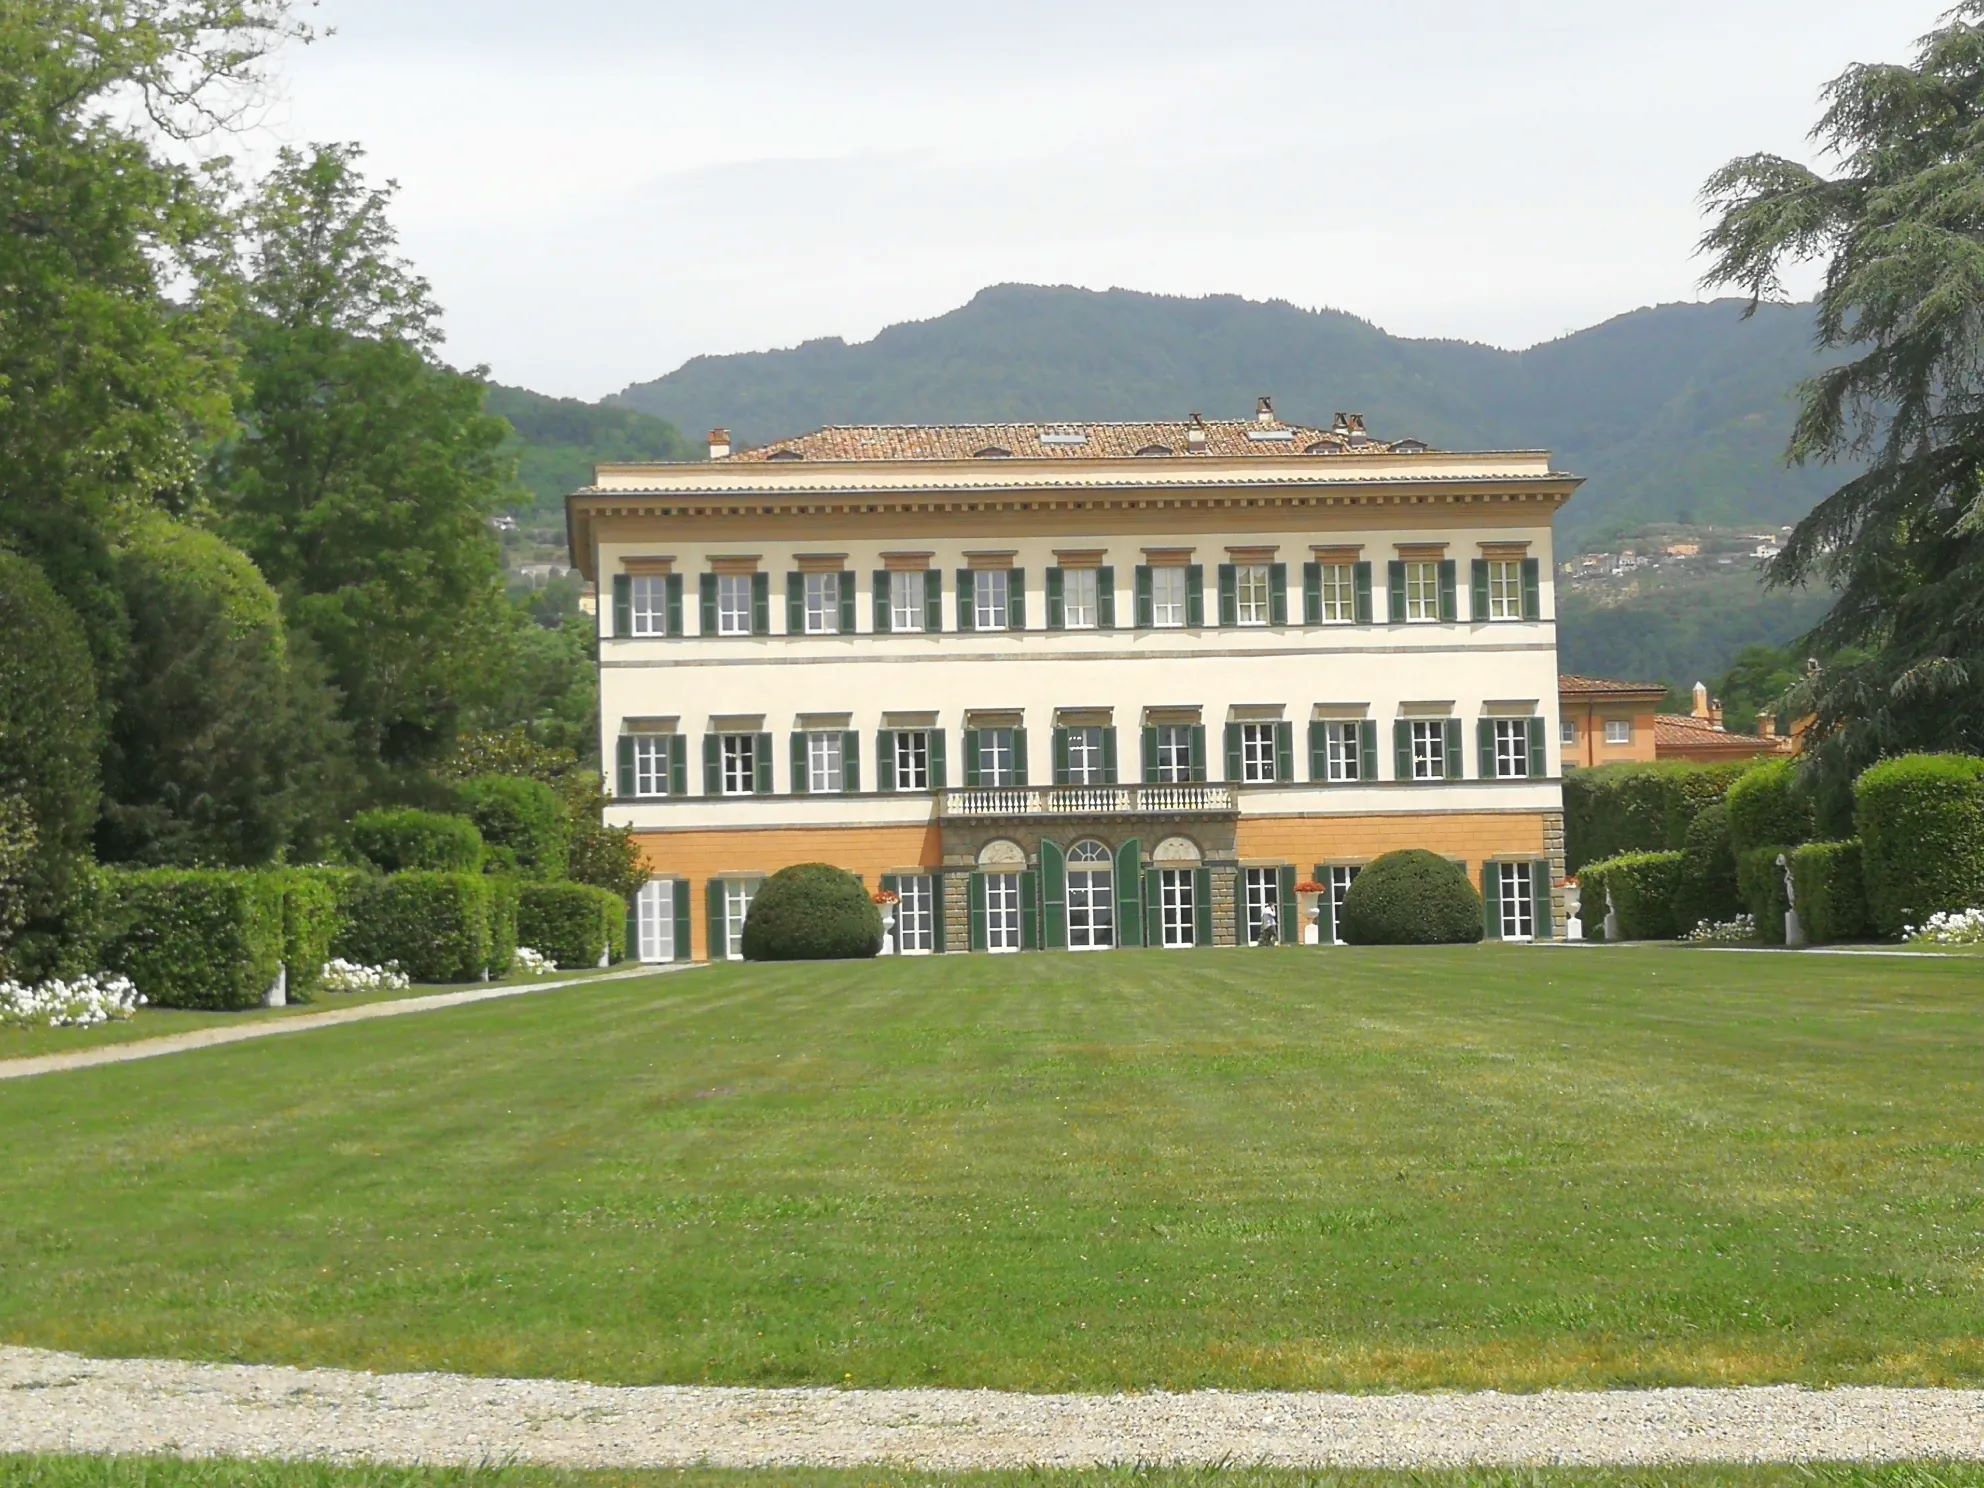 Villas in Lucca, their stories, and their beauty